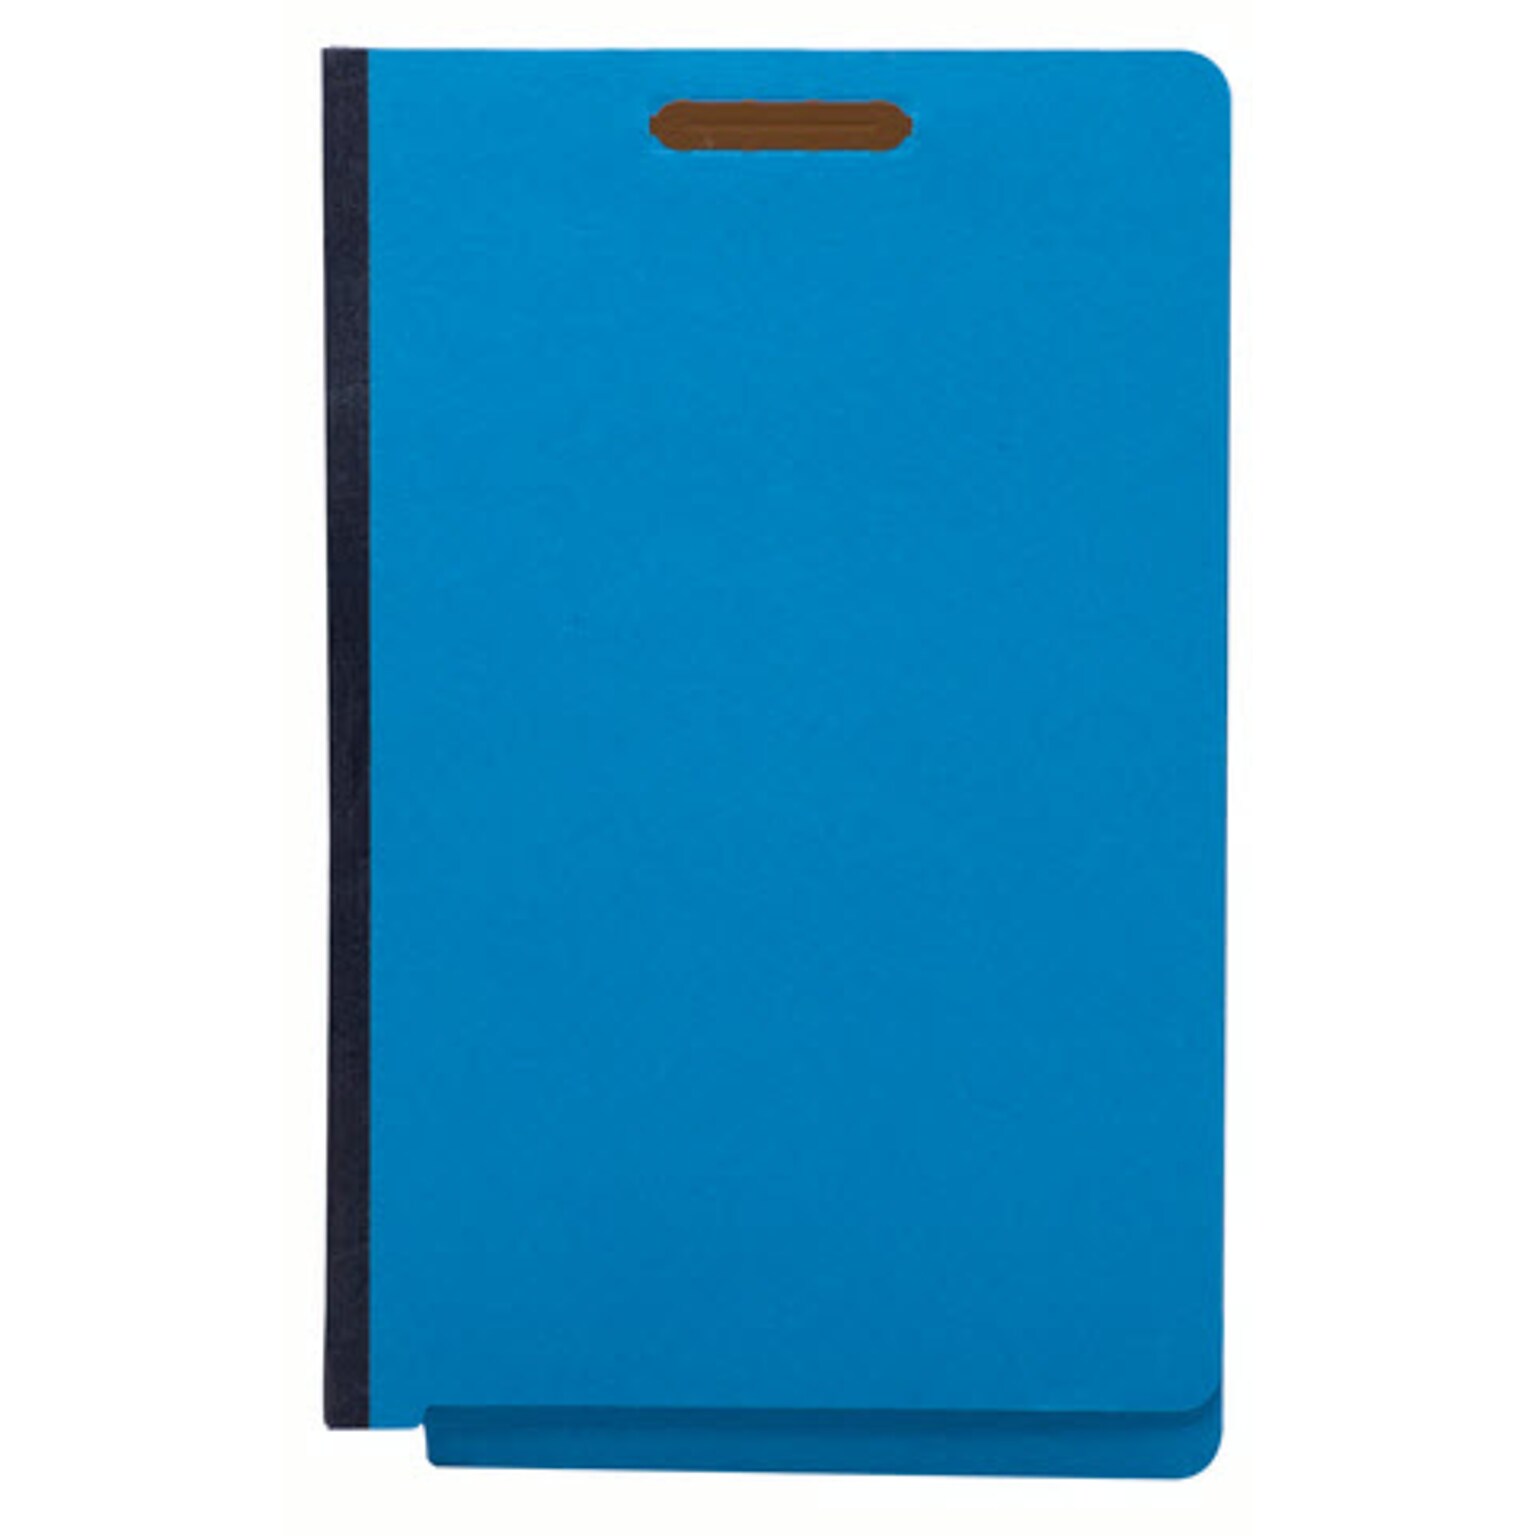 Quill Brand® End-Tab Partition Folders, 2 Partitions, 6 Fasteners, Cobalt Blue, Legal, 15/Box (749026)